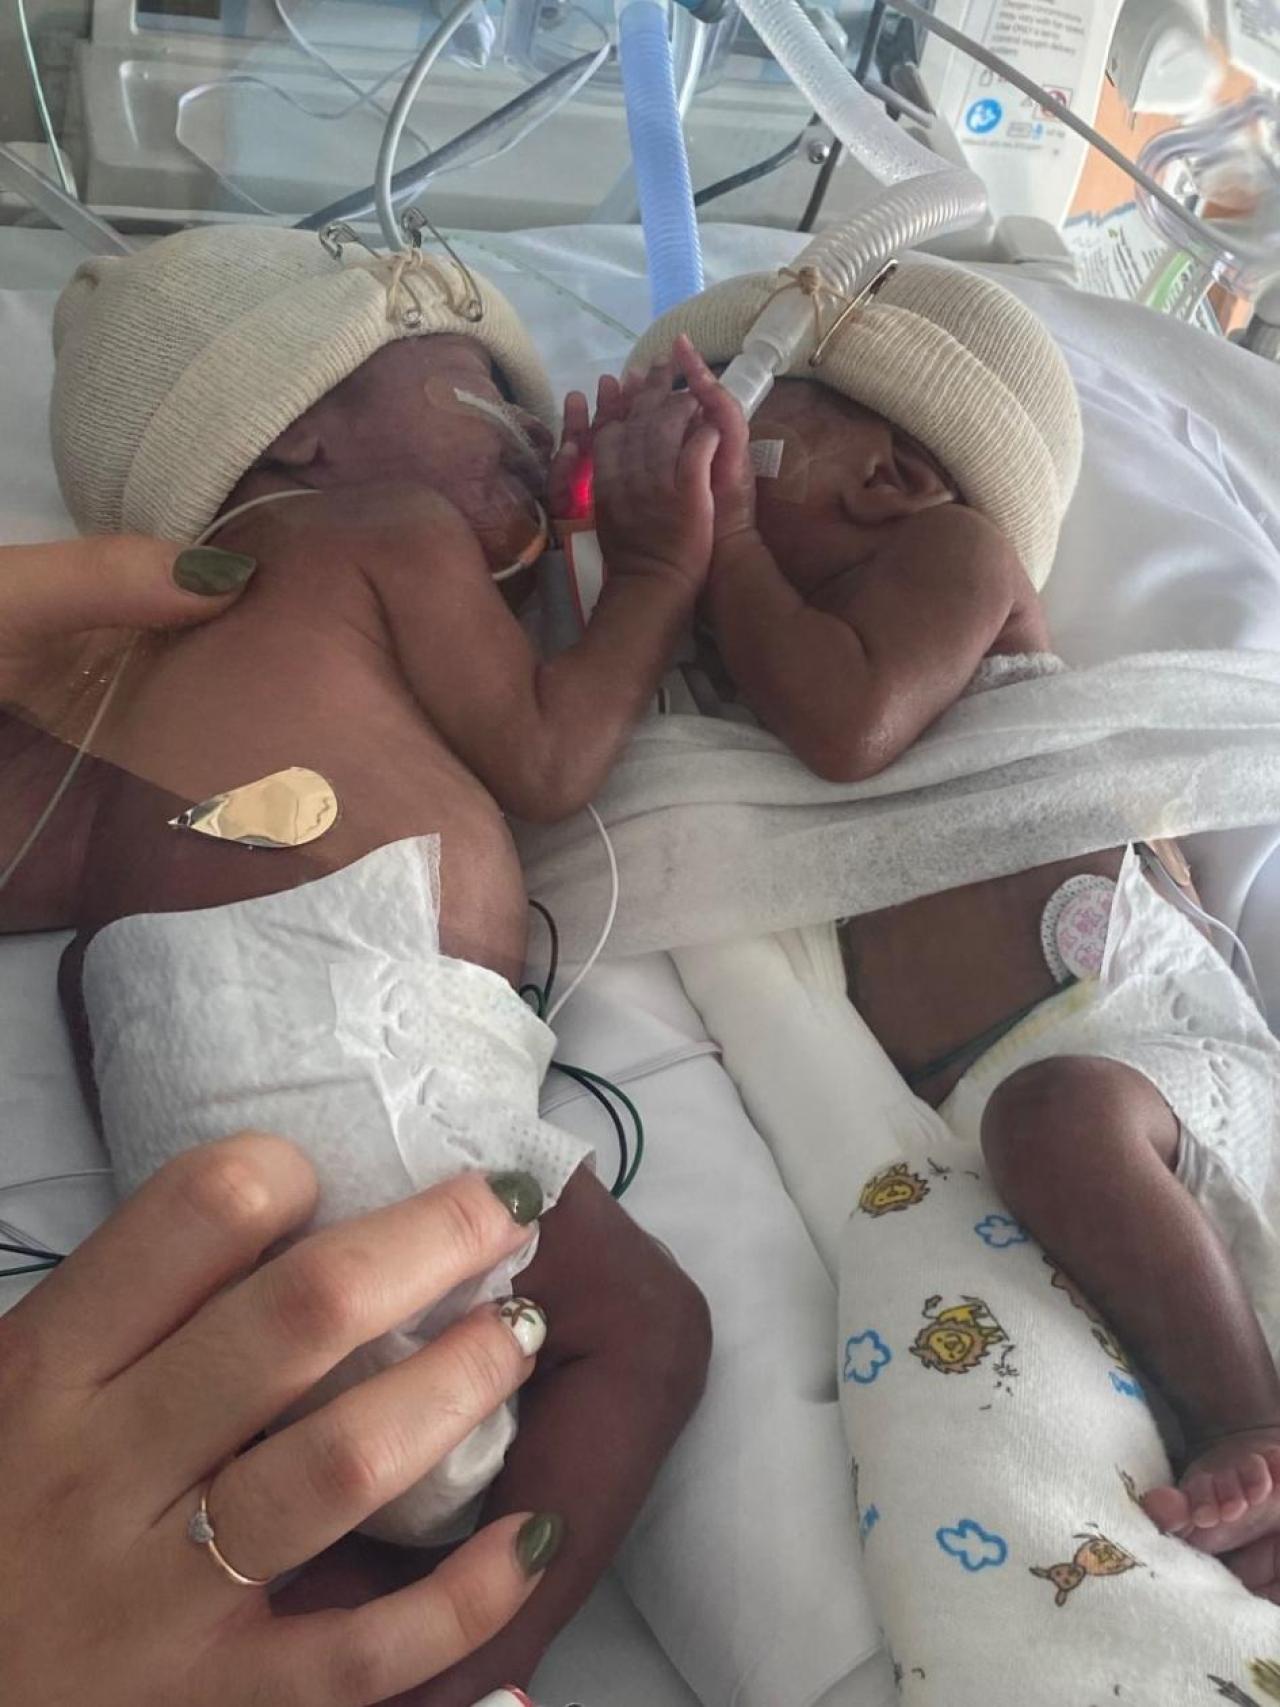 two premature babies in a neonatal intensive care bed